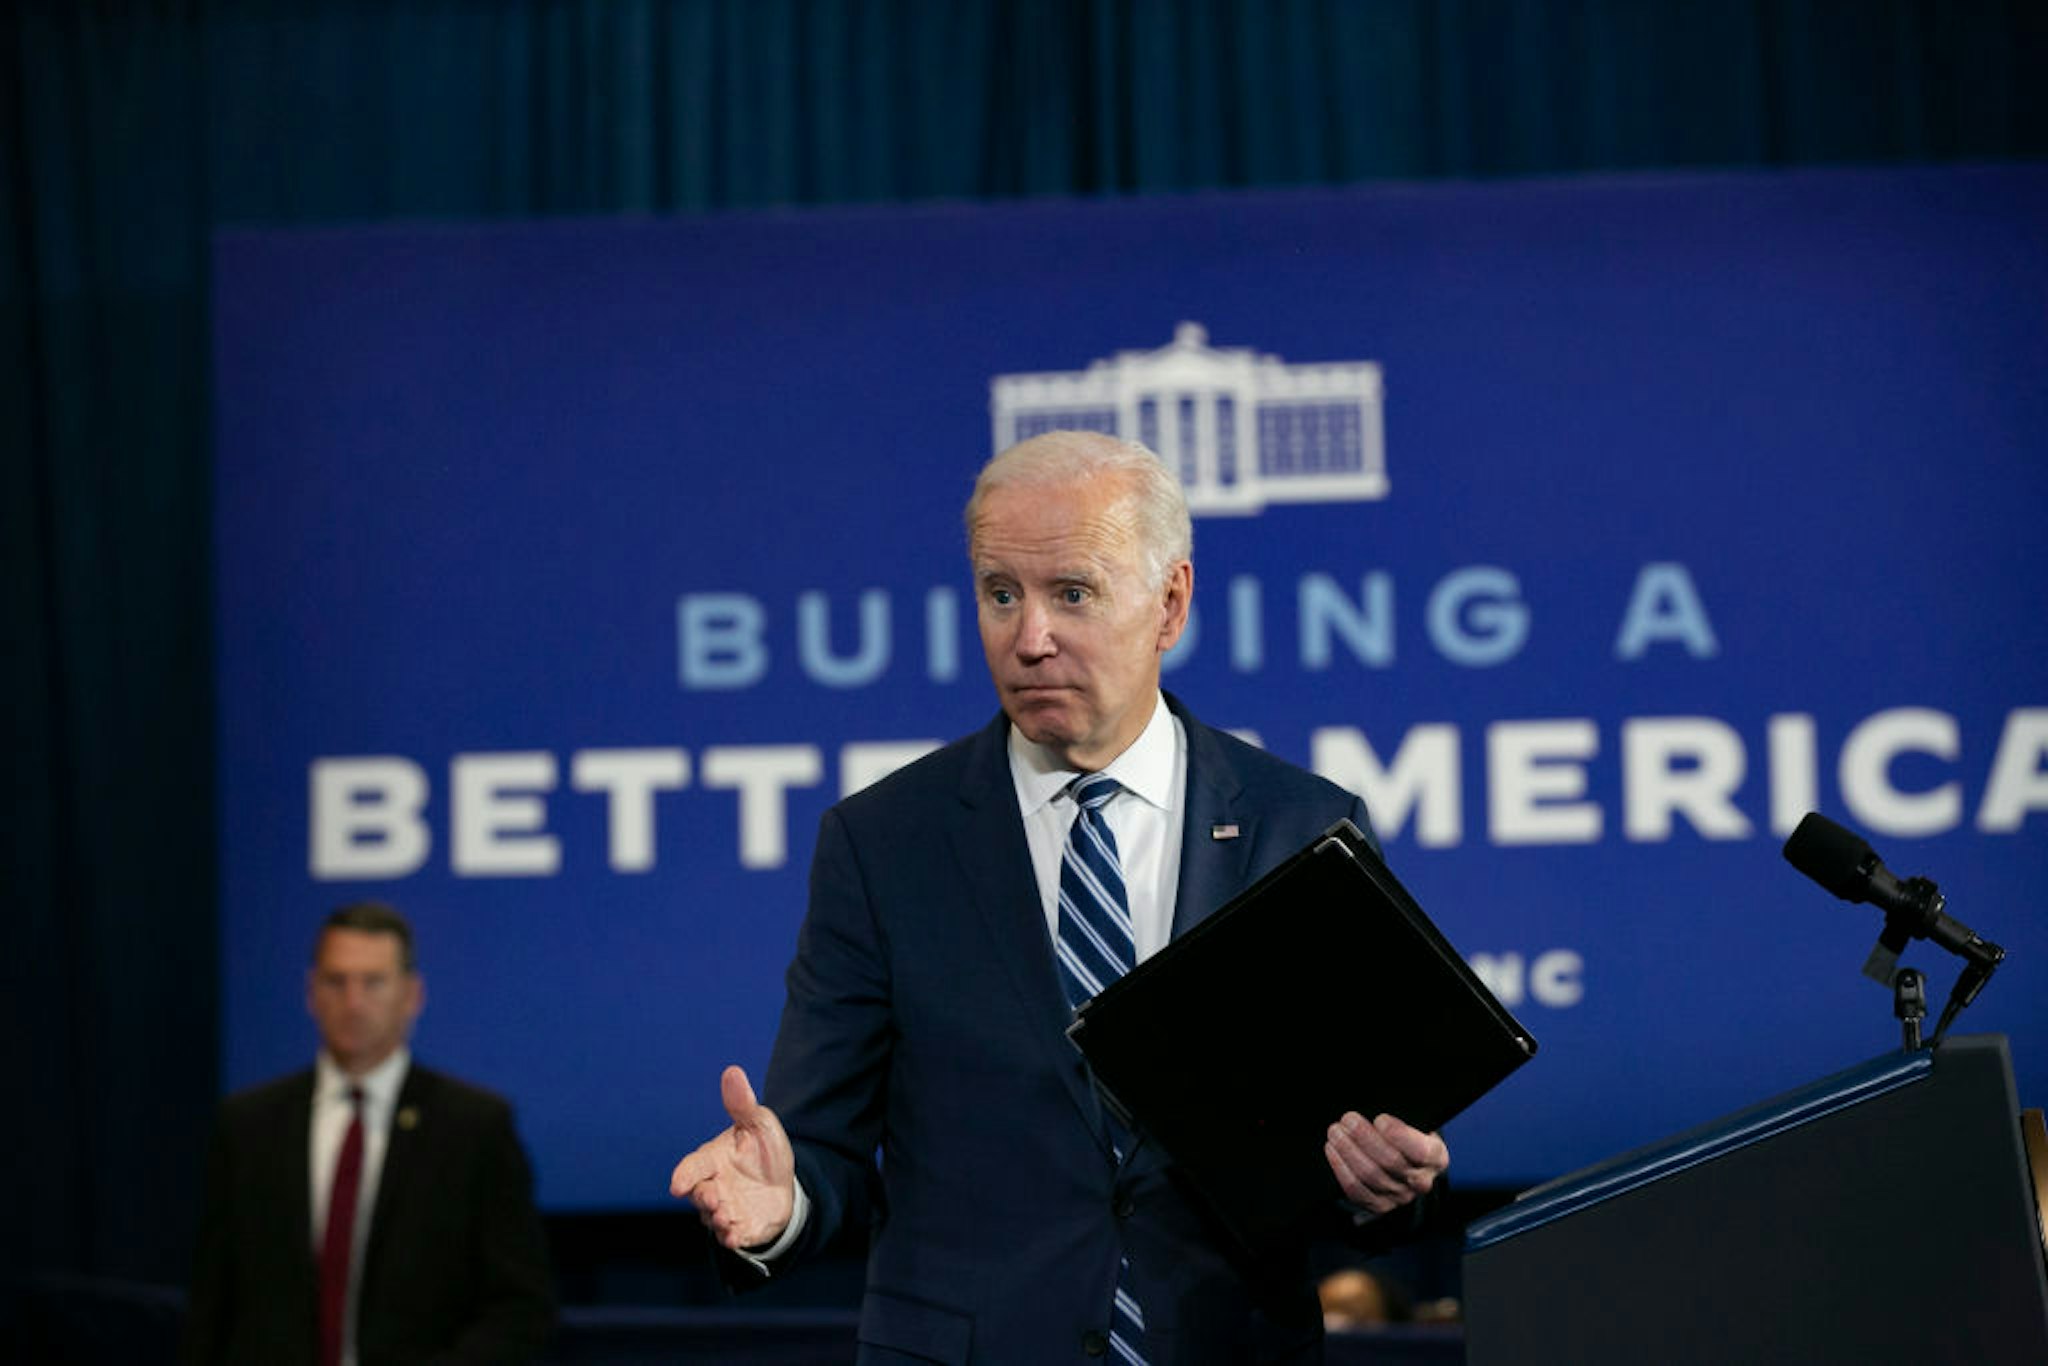 GREENSBORO, NC - APRIL 14: U.S. President Joe Biden speaks to guests during a visit to North Carolina Agricultural and Technical State University on April 14, 2022 in Greensboro, North Carolina. Biden was in North Carolina to discuss his administration's efforts to create manufacturing jobs and alleviate the impacts of inflation.